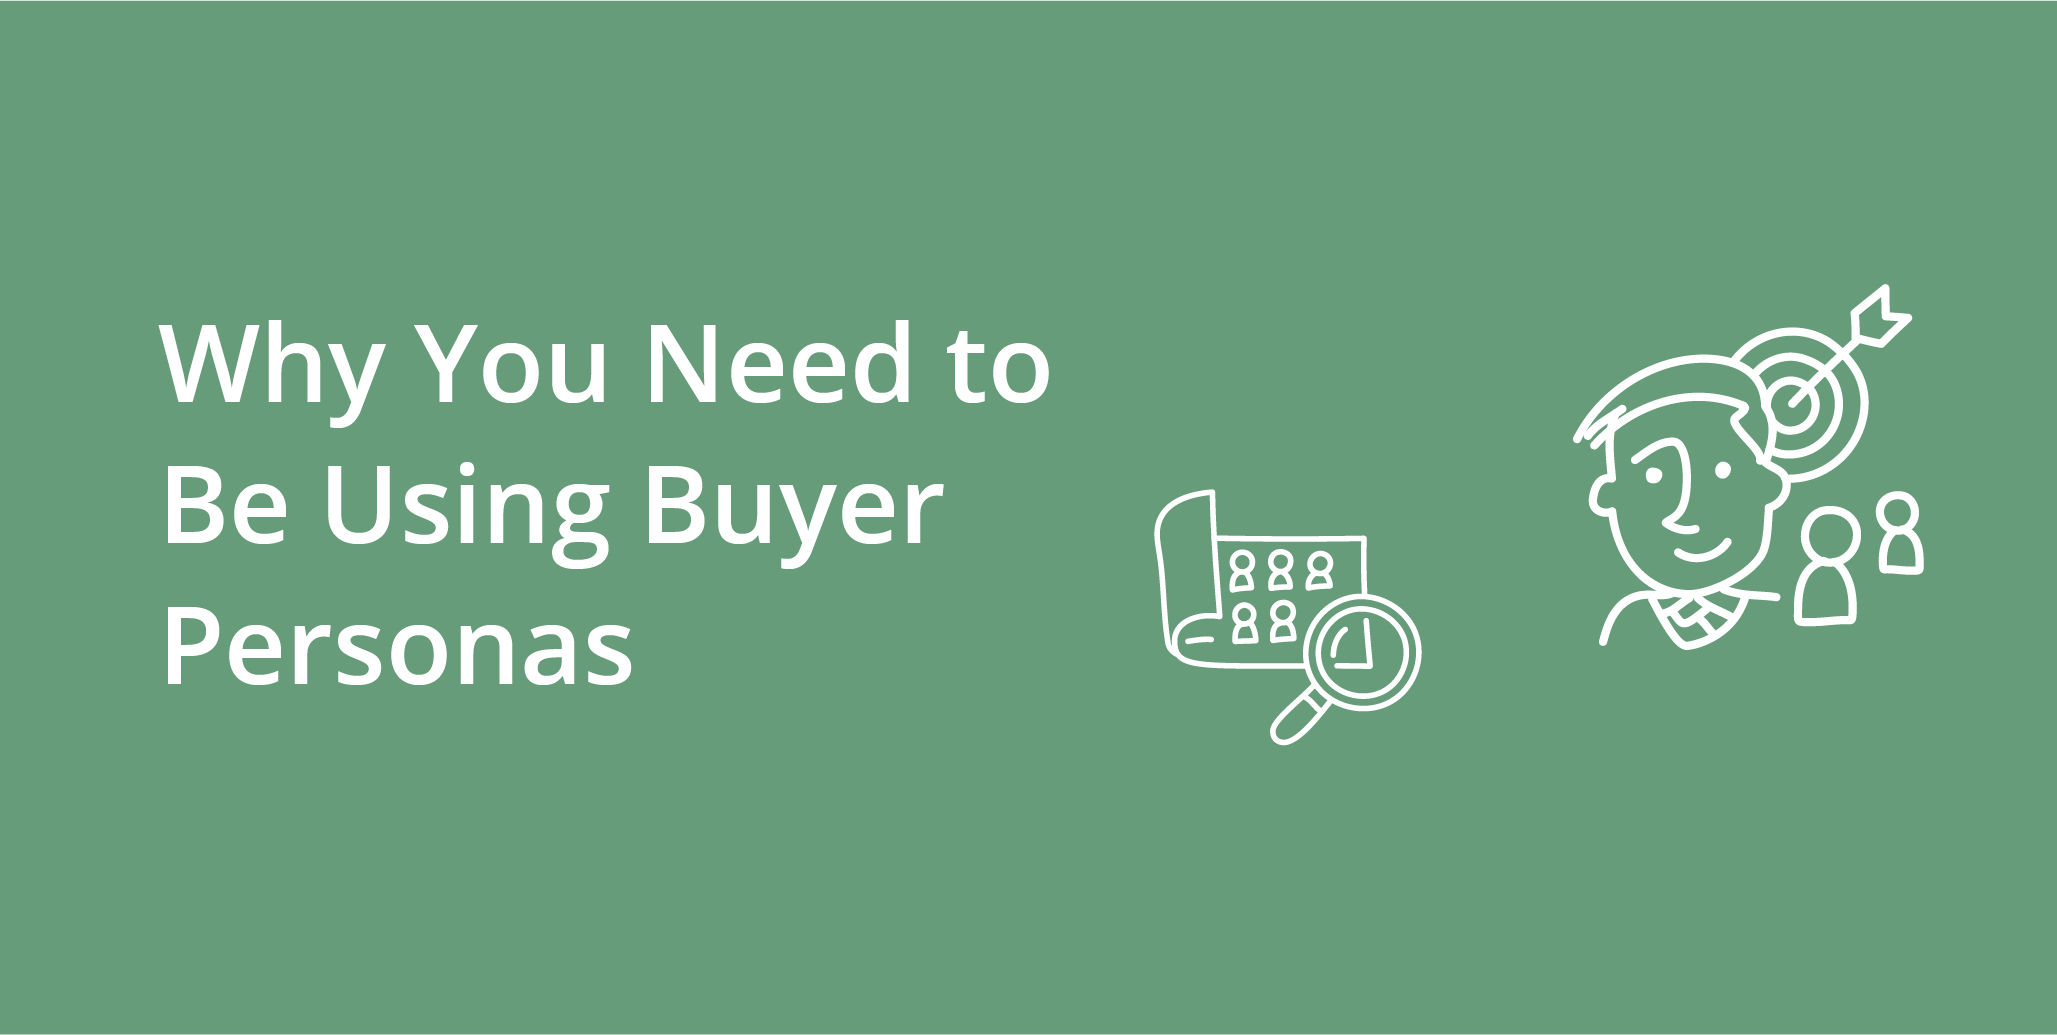 Why You Need to Be Using Buyer Personas